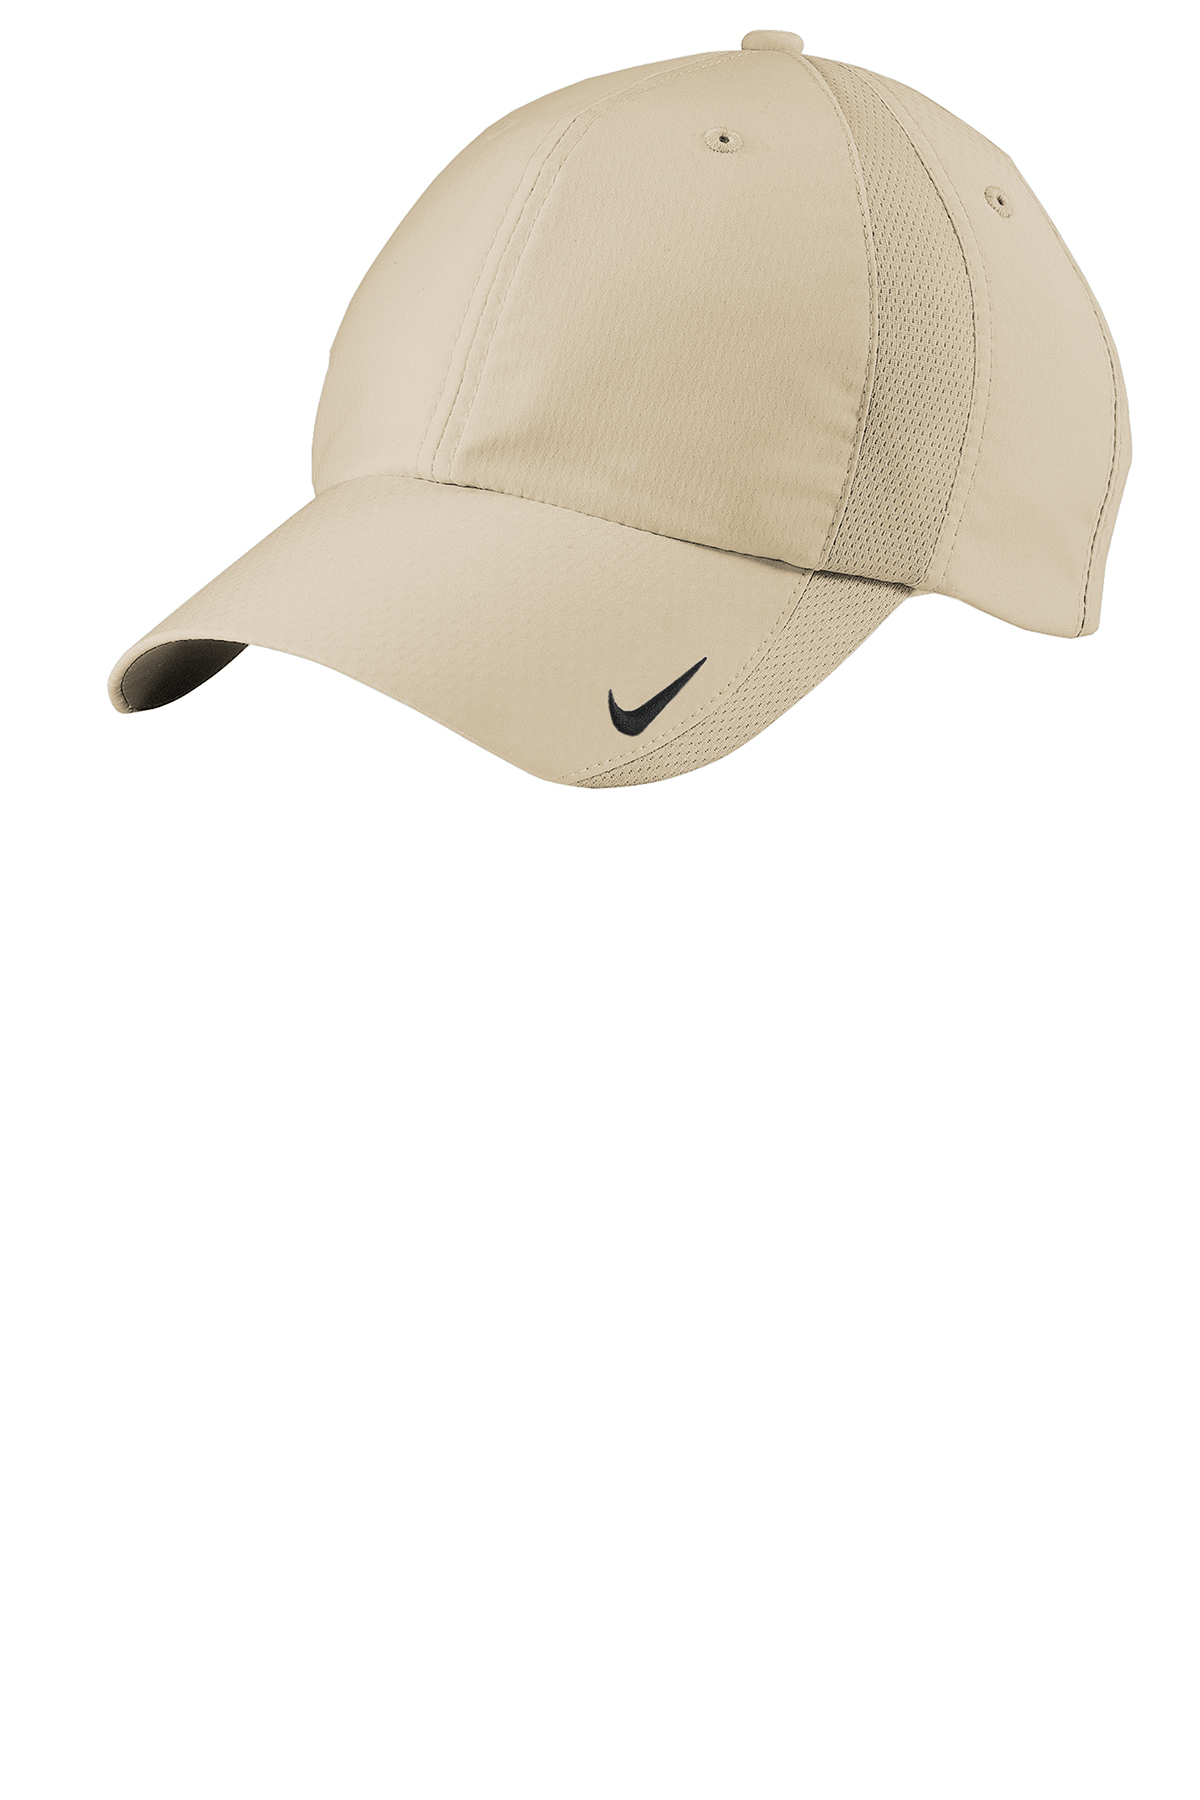 nike outlet caps